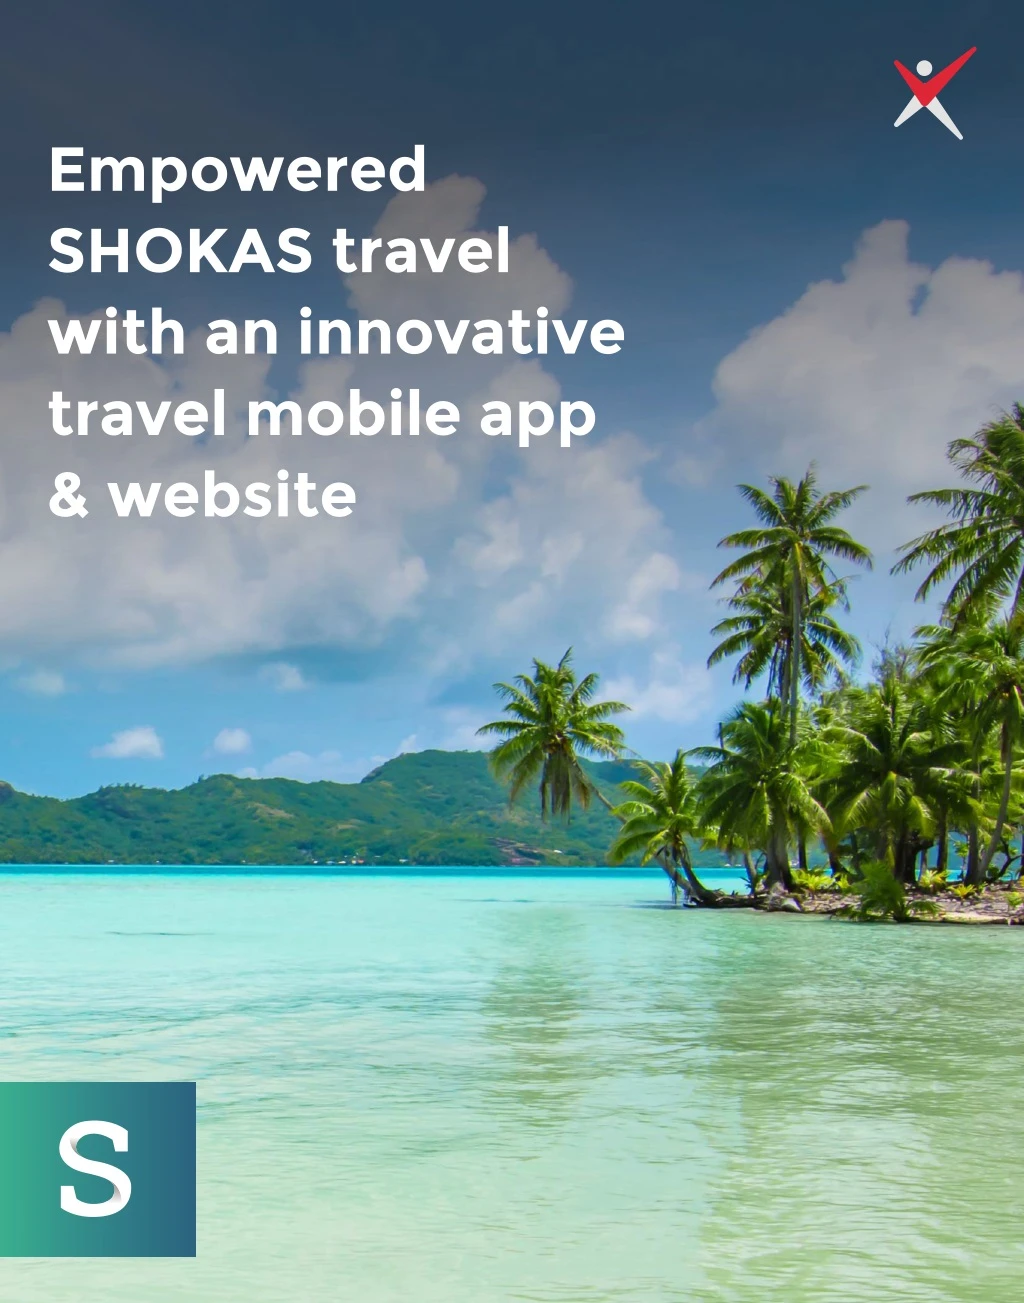 empowered shokas travel with an innovative travel